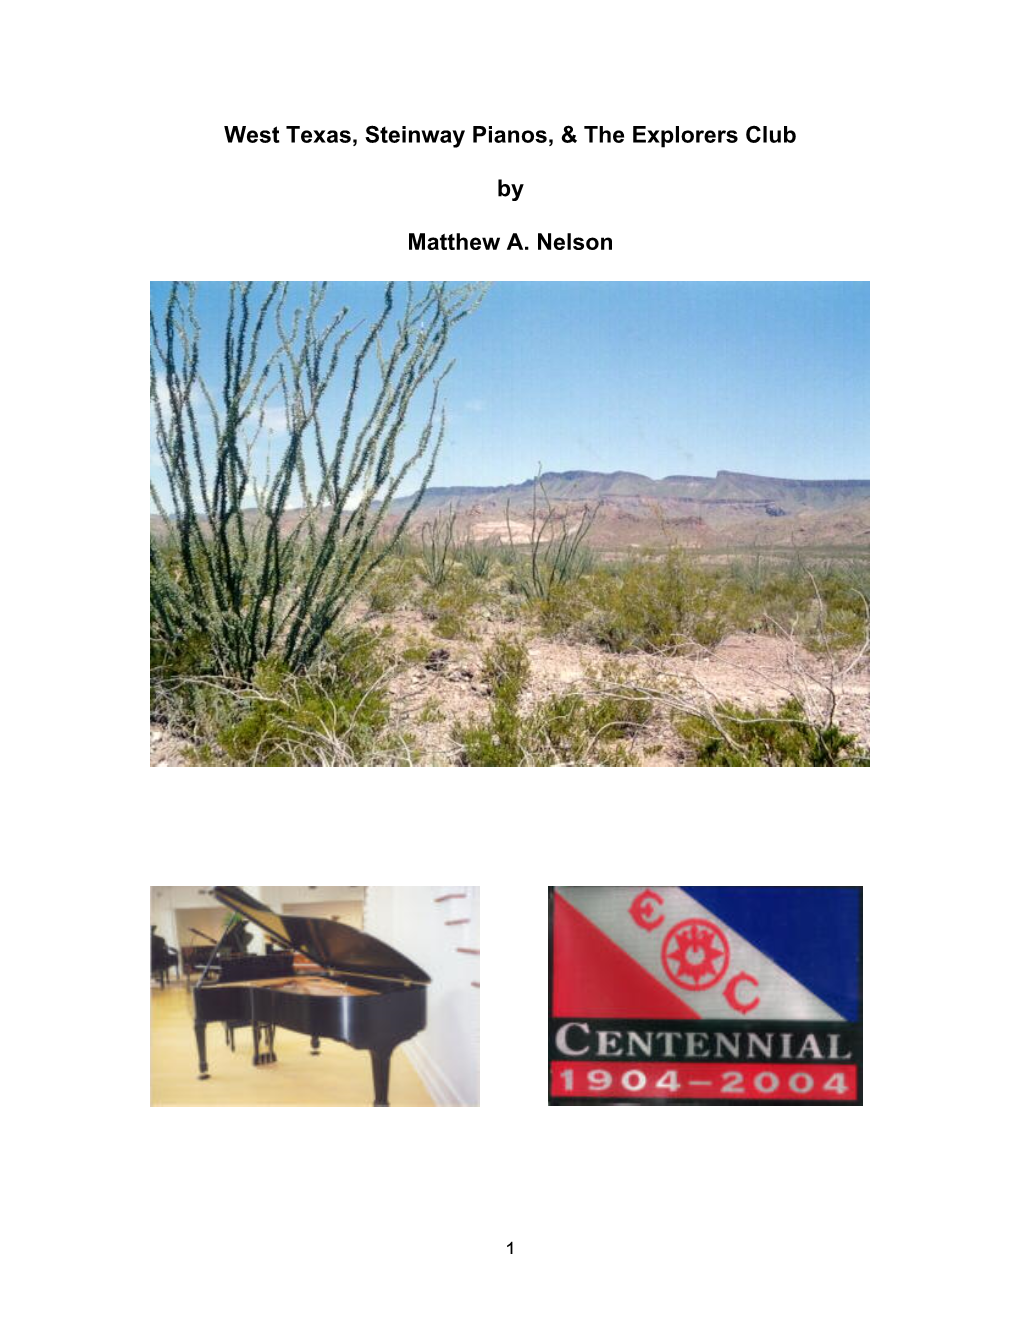 West Texas, Steinway Pianos, & the Explorers Club by Matthew A. Nelson